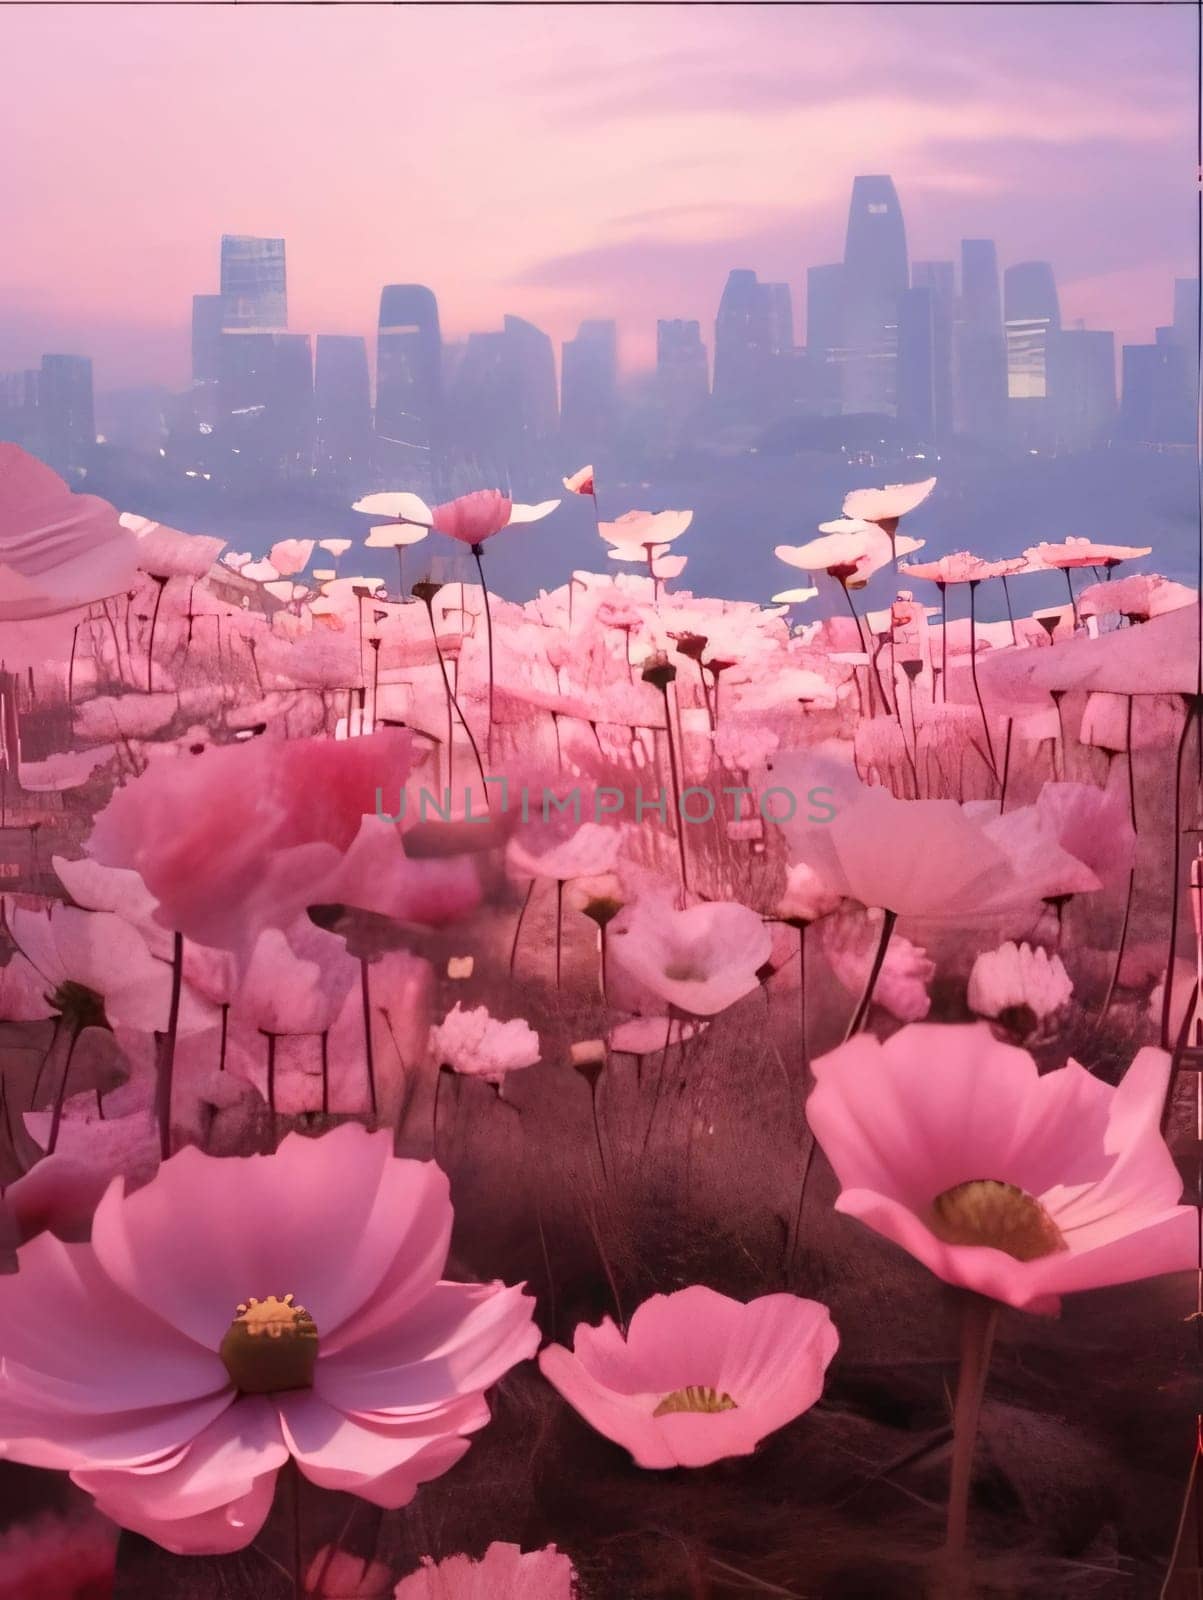 Field full of pink flowers in the background city skyline tall skyscrapers. Flowering flowers, a symbol of spring, new life. A joyful time of nature waking up to life.